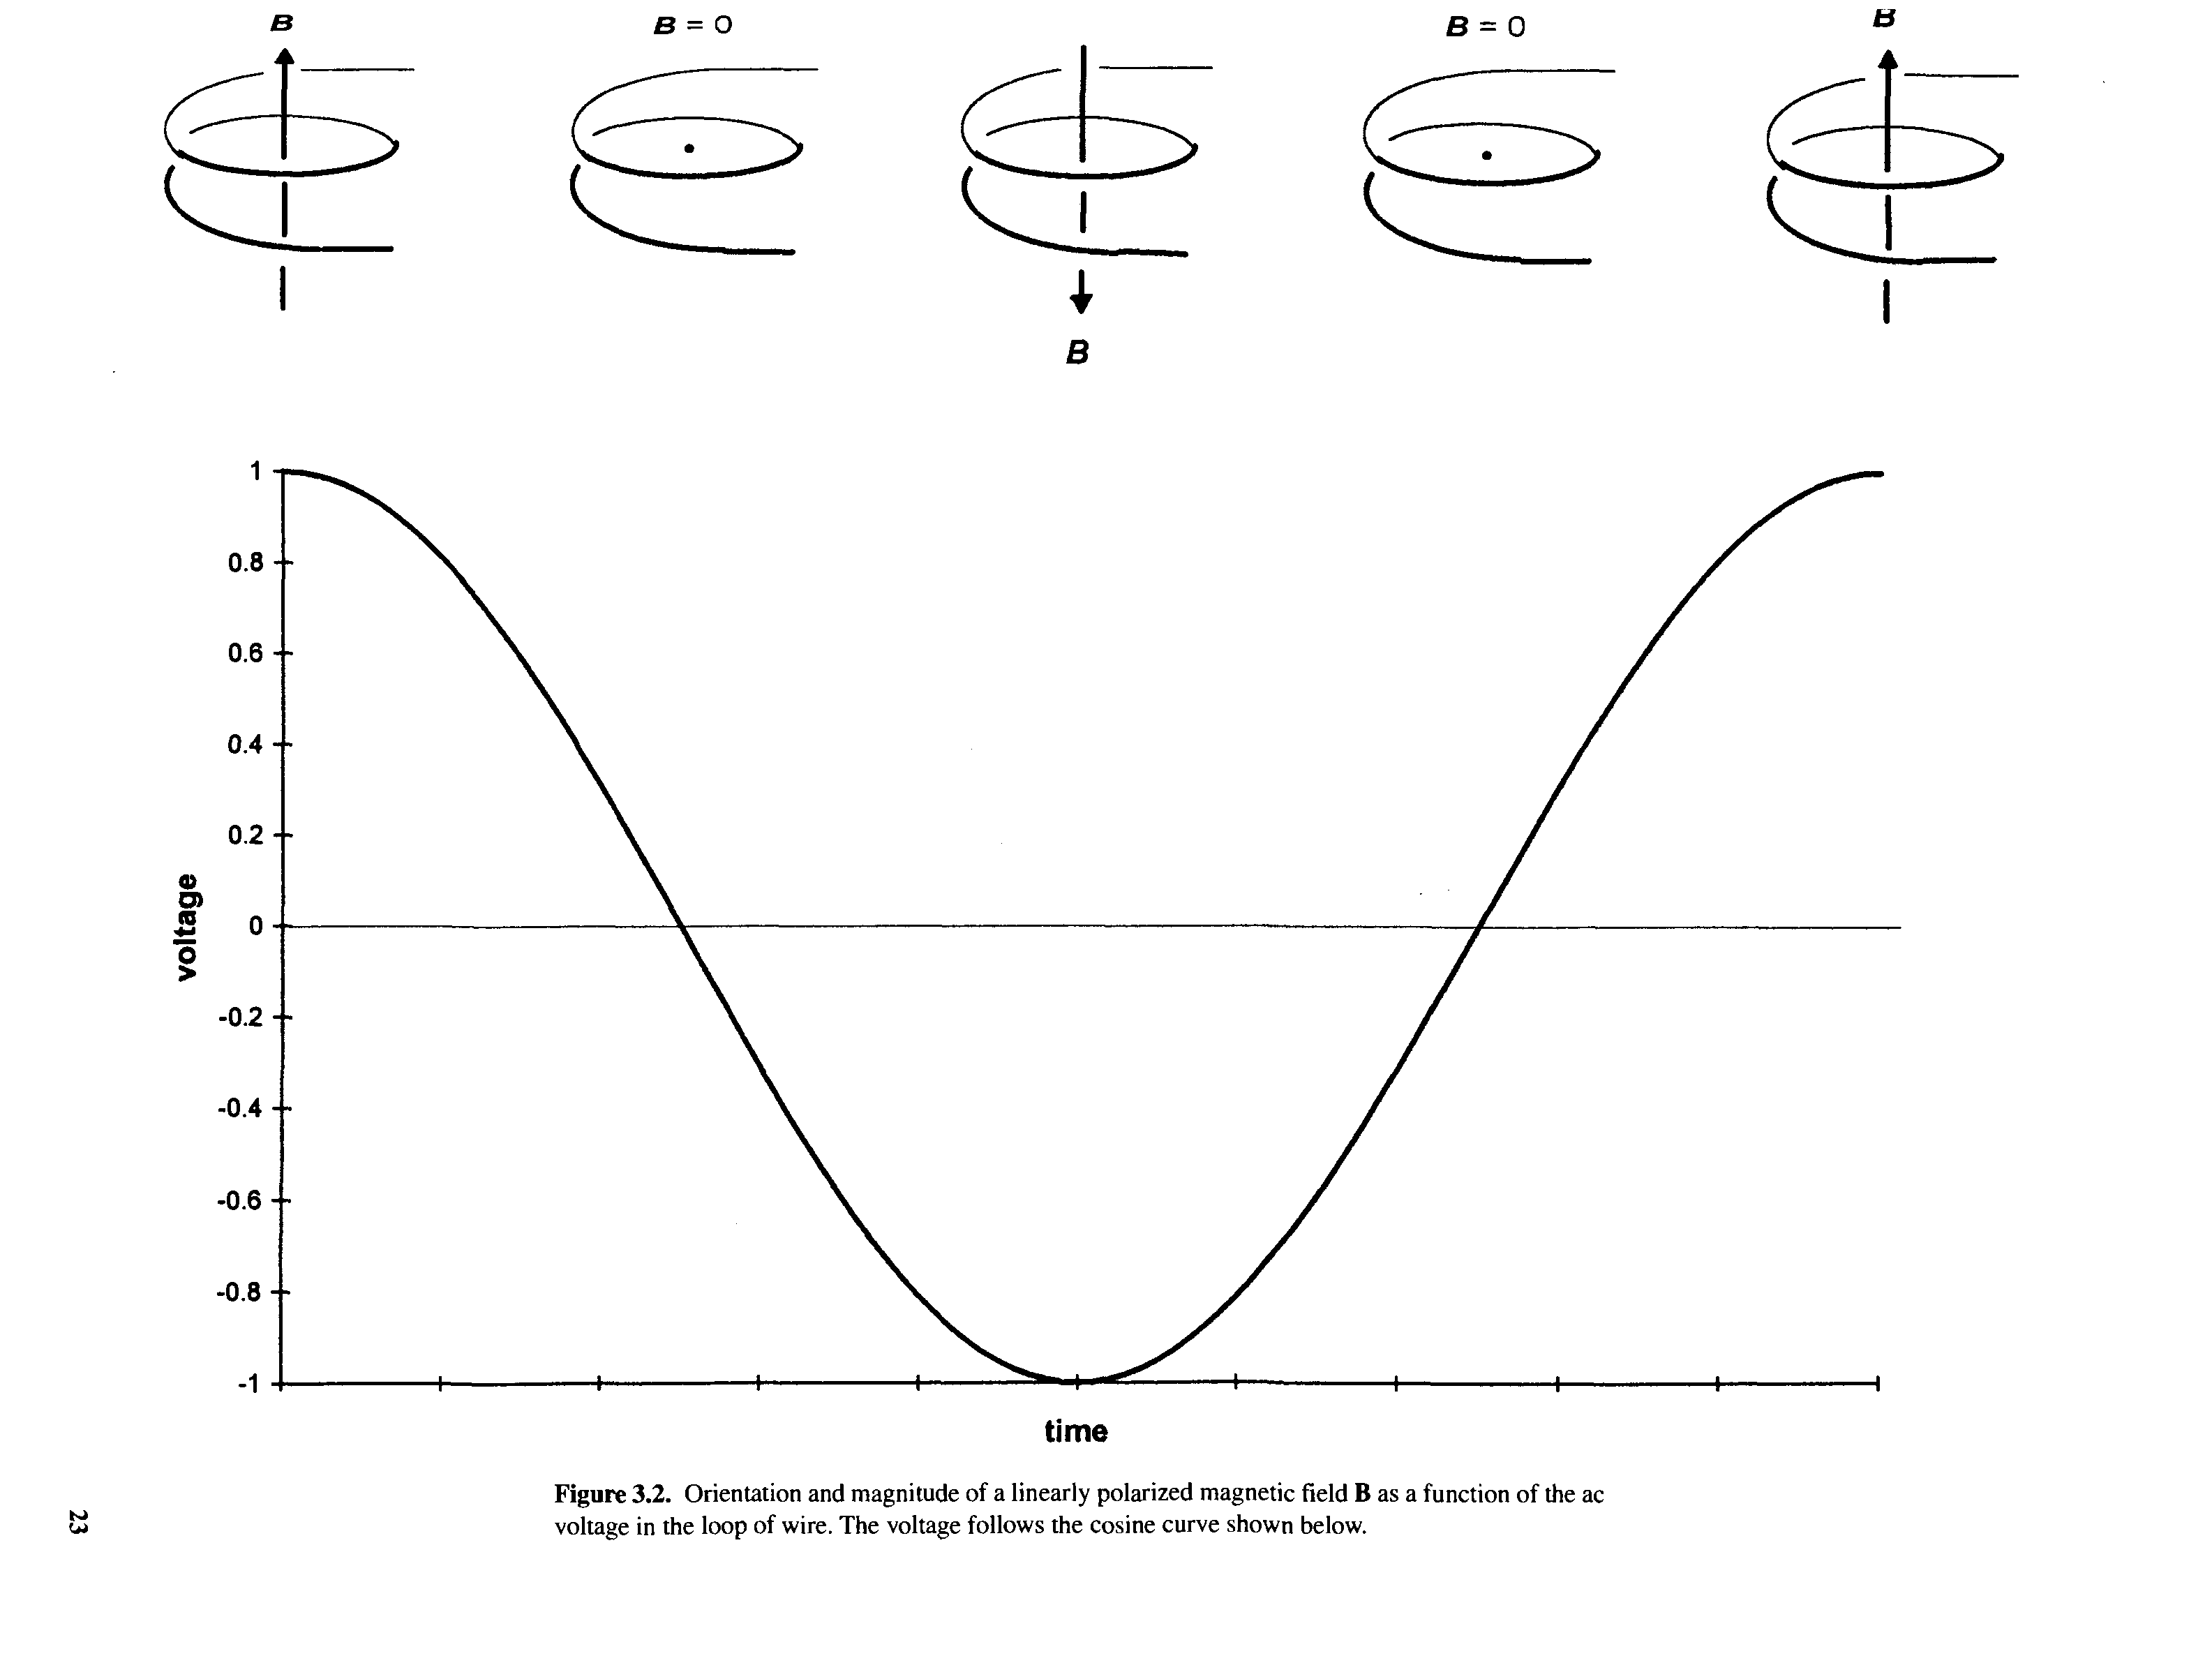 Figure 3.2. Orientation and magnitude of a linearly polarized magnetic field B as a function of the ac voltage in the loop of wire. The voltage follows the cosine curve shown below.